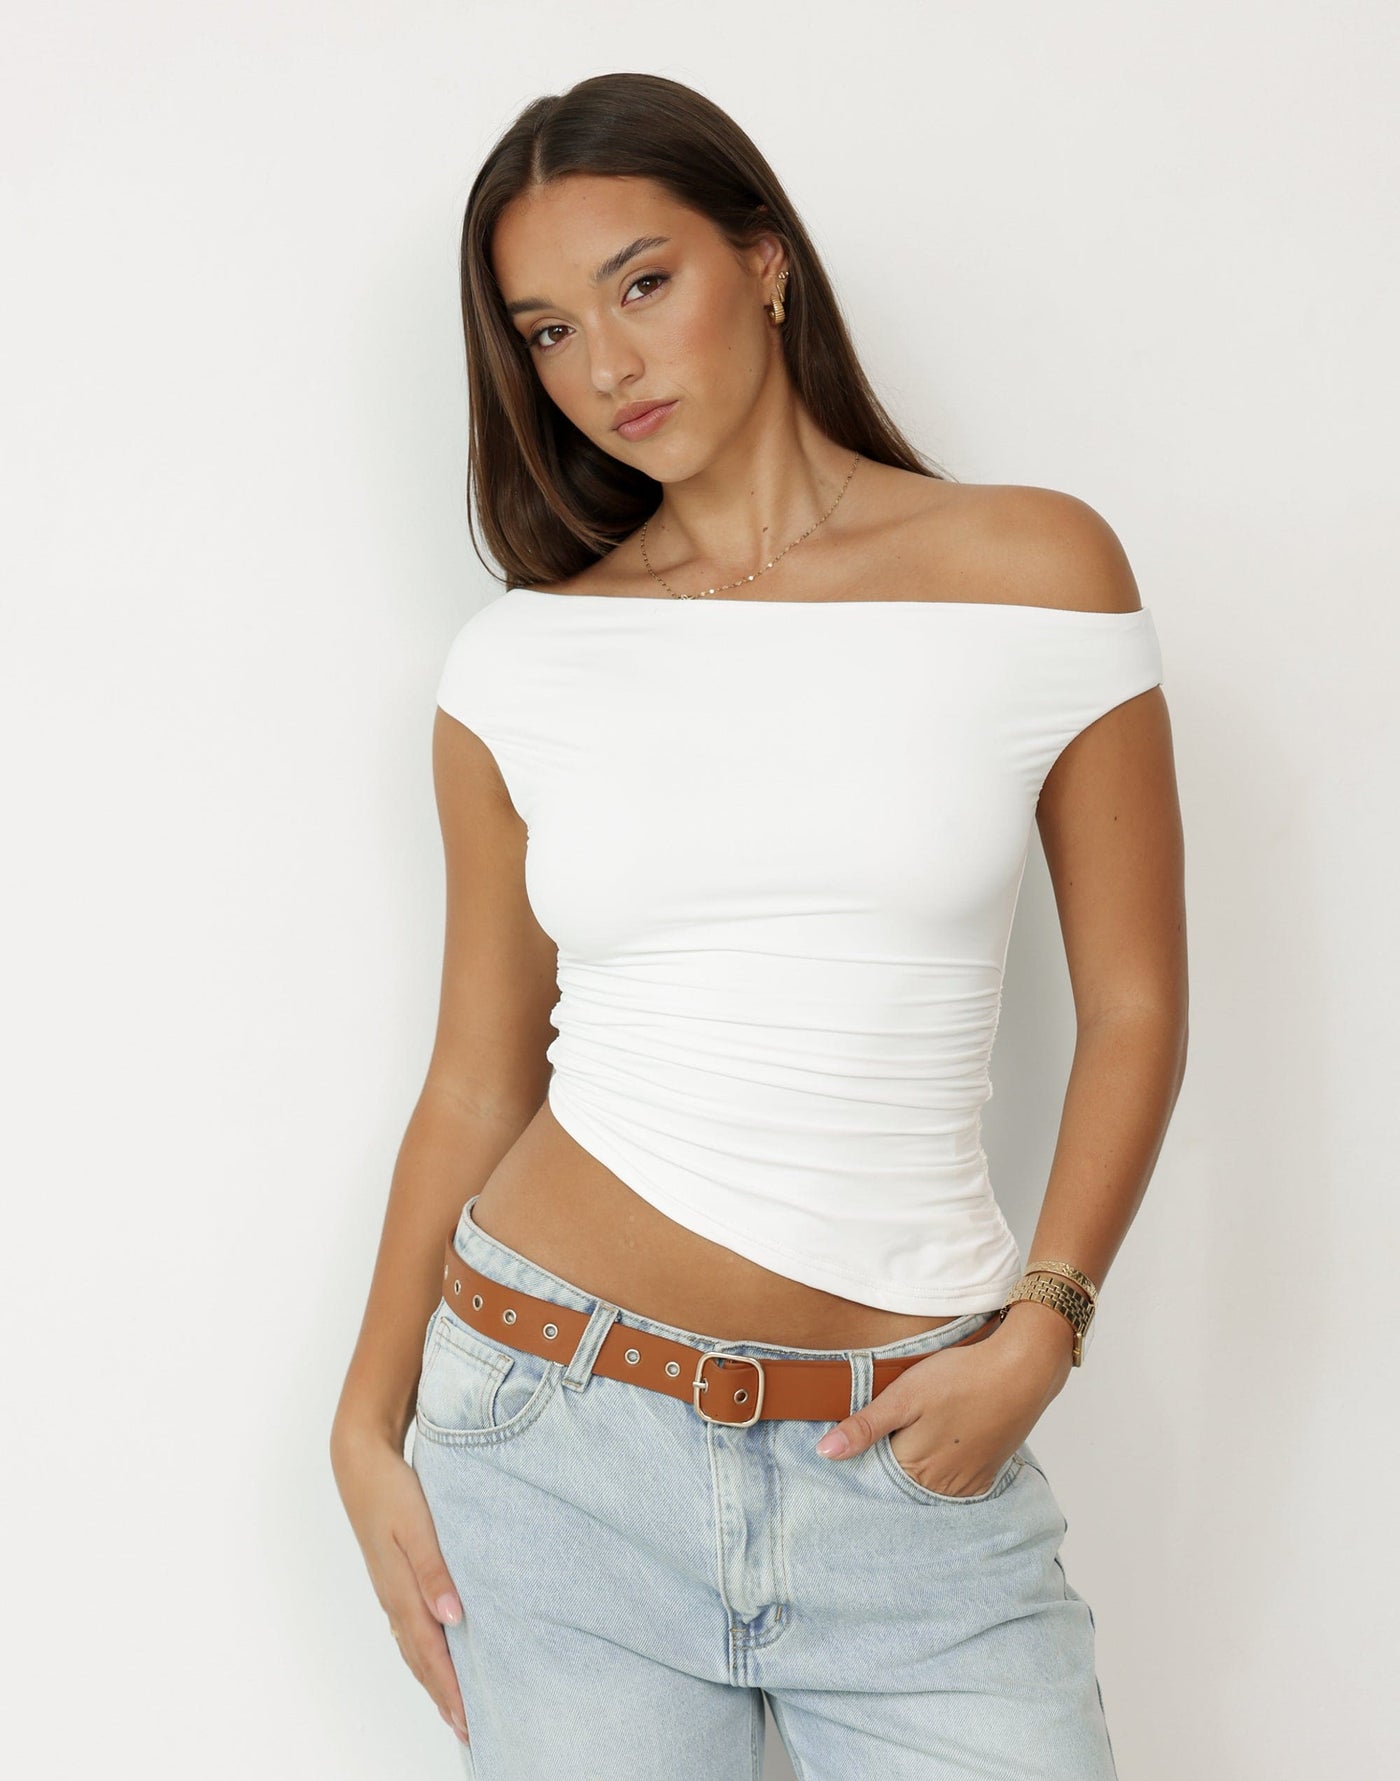 Namiko Top (White) | Charcoal Clothing Exclusive - - Women's Top - Charcoal Clothing